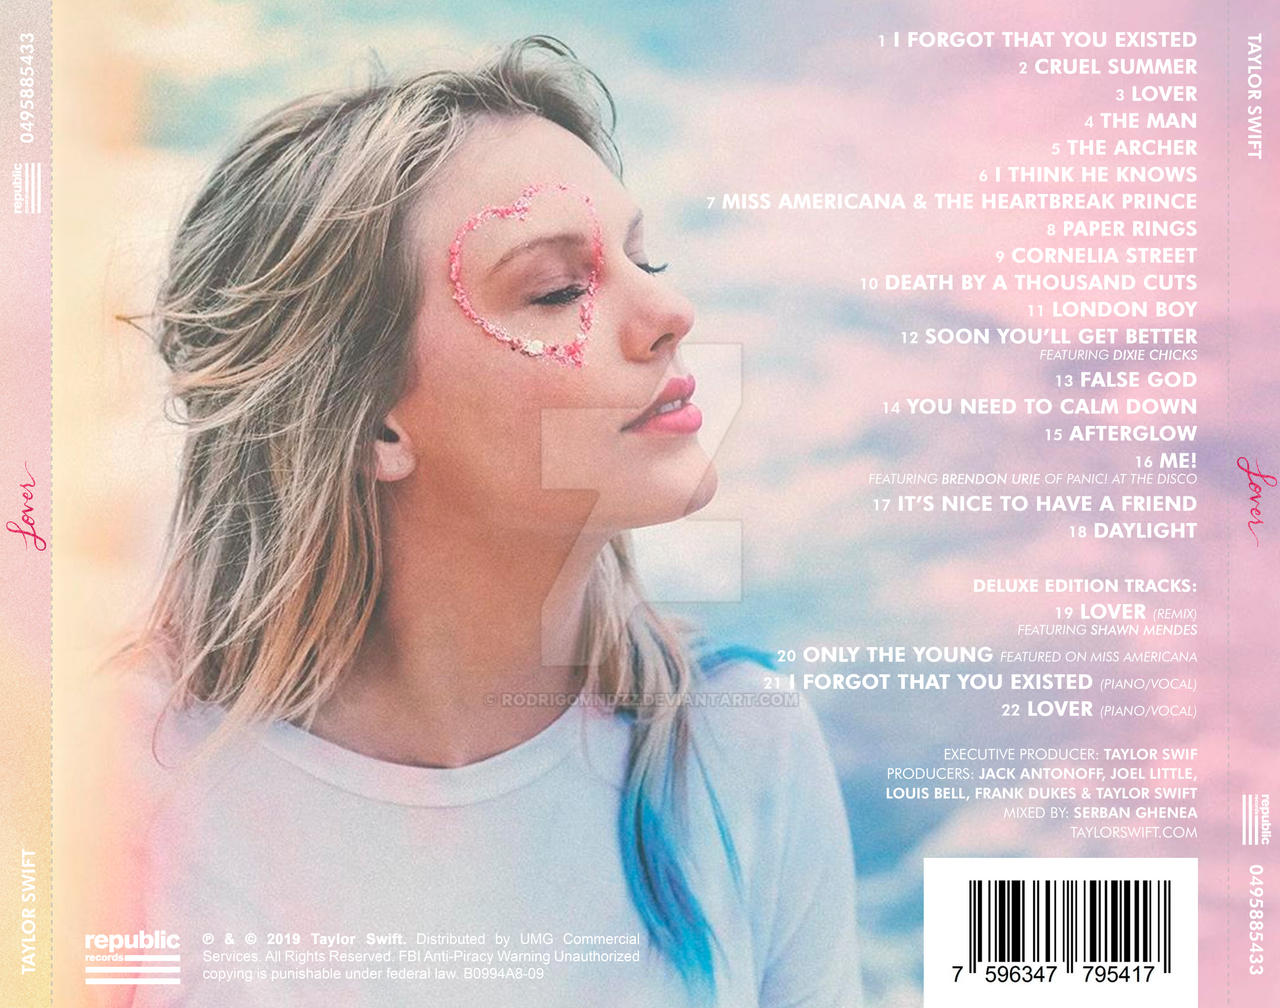 Taylor Swift - Lover (Deluxe) | Back Cover #2 by rodrigomndzz on DeviantArt